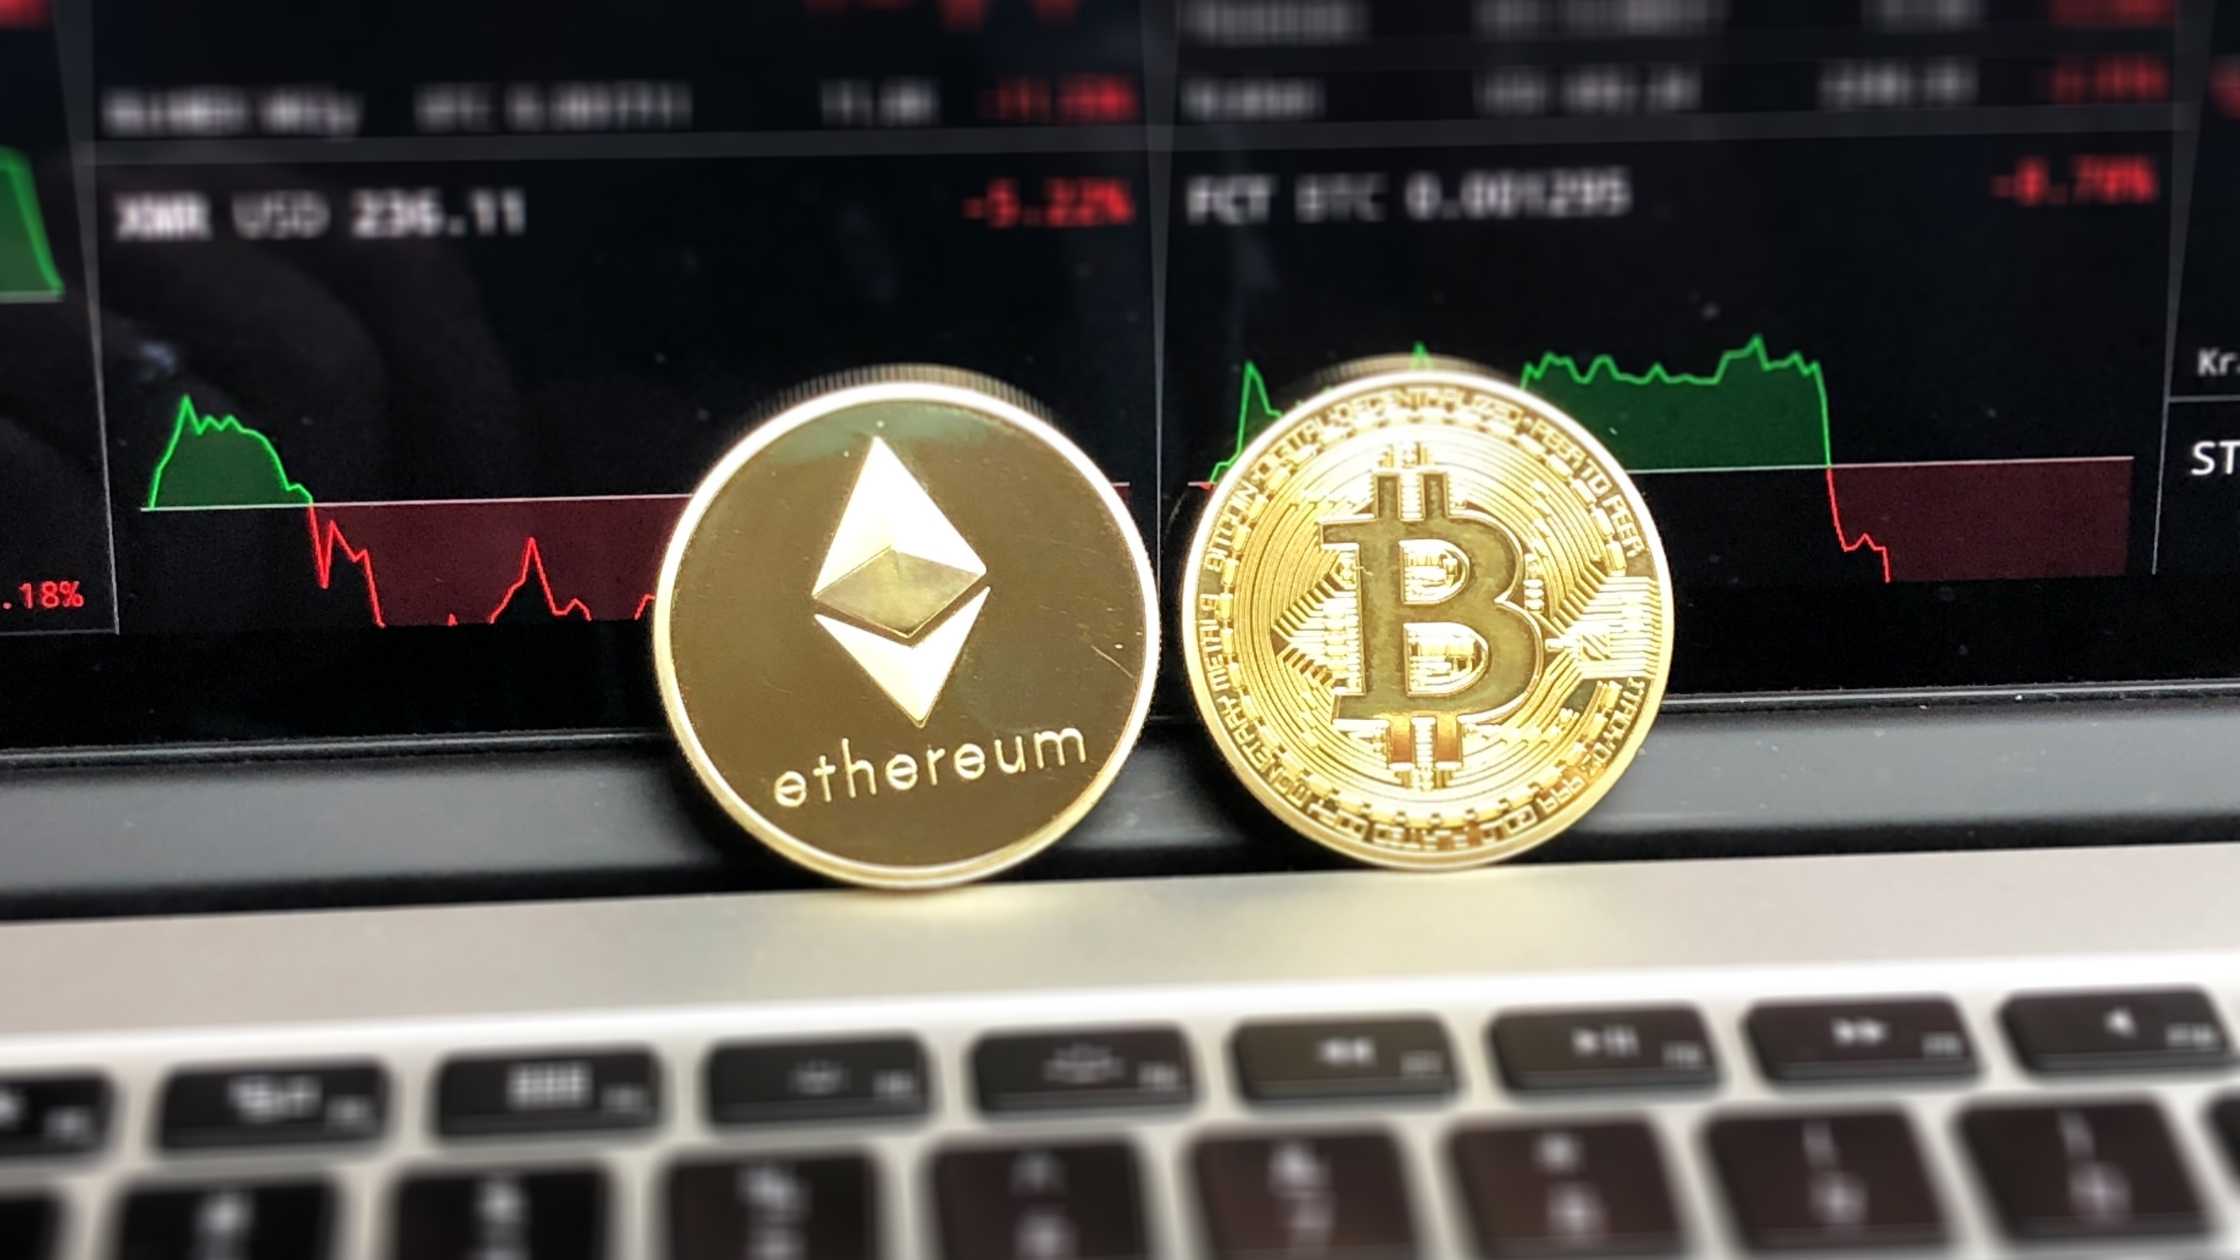 An Ethereum Investment Is Better Than Bitcoin in the Long Run